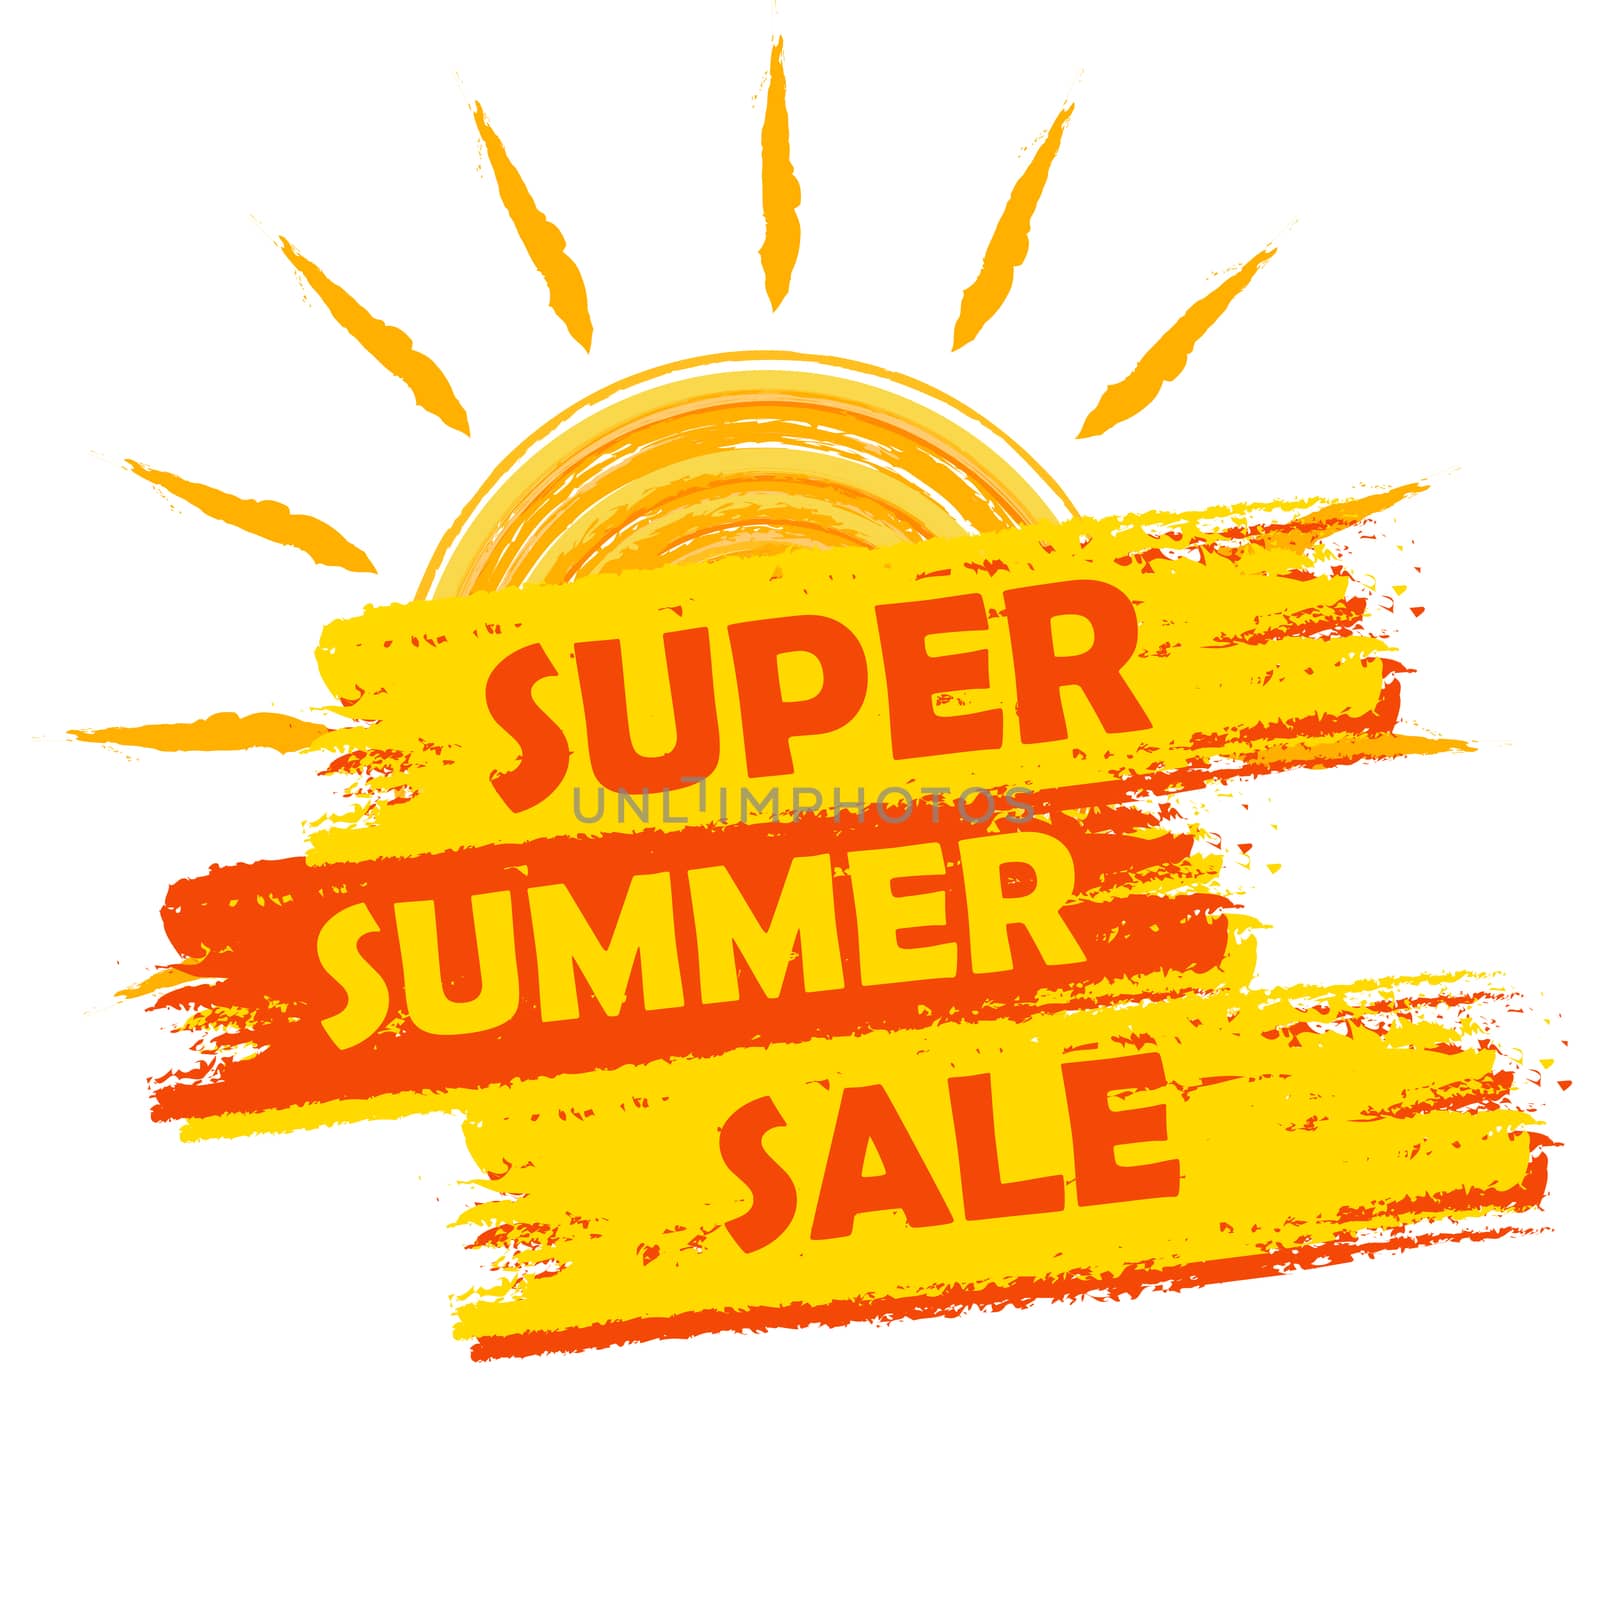 super summer sale with sun sign, yellow and orange drawn label by marinini